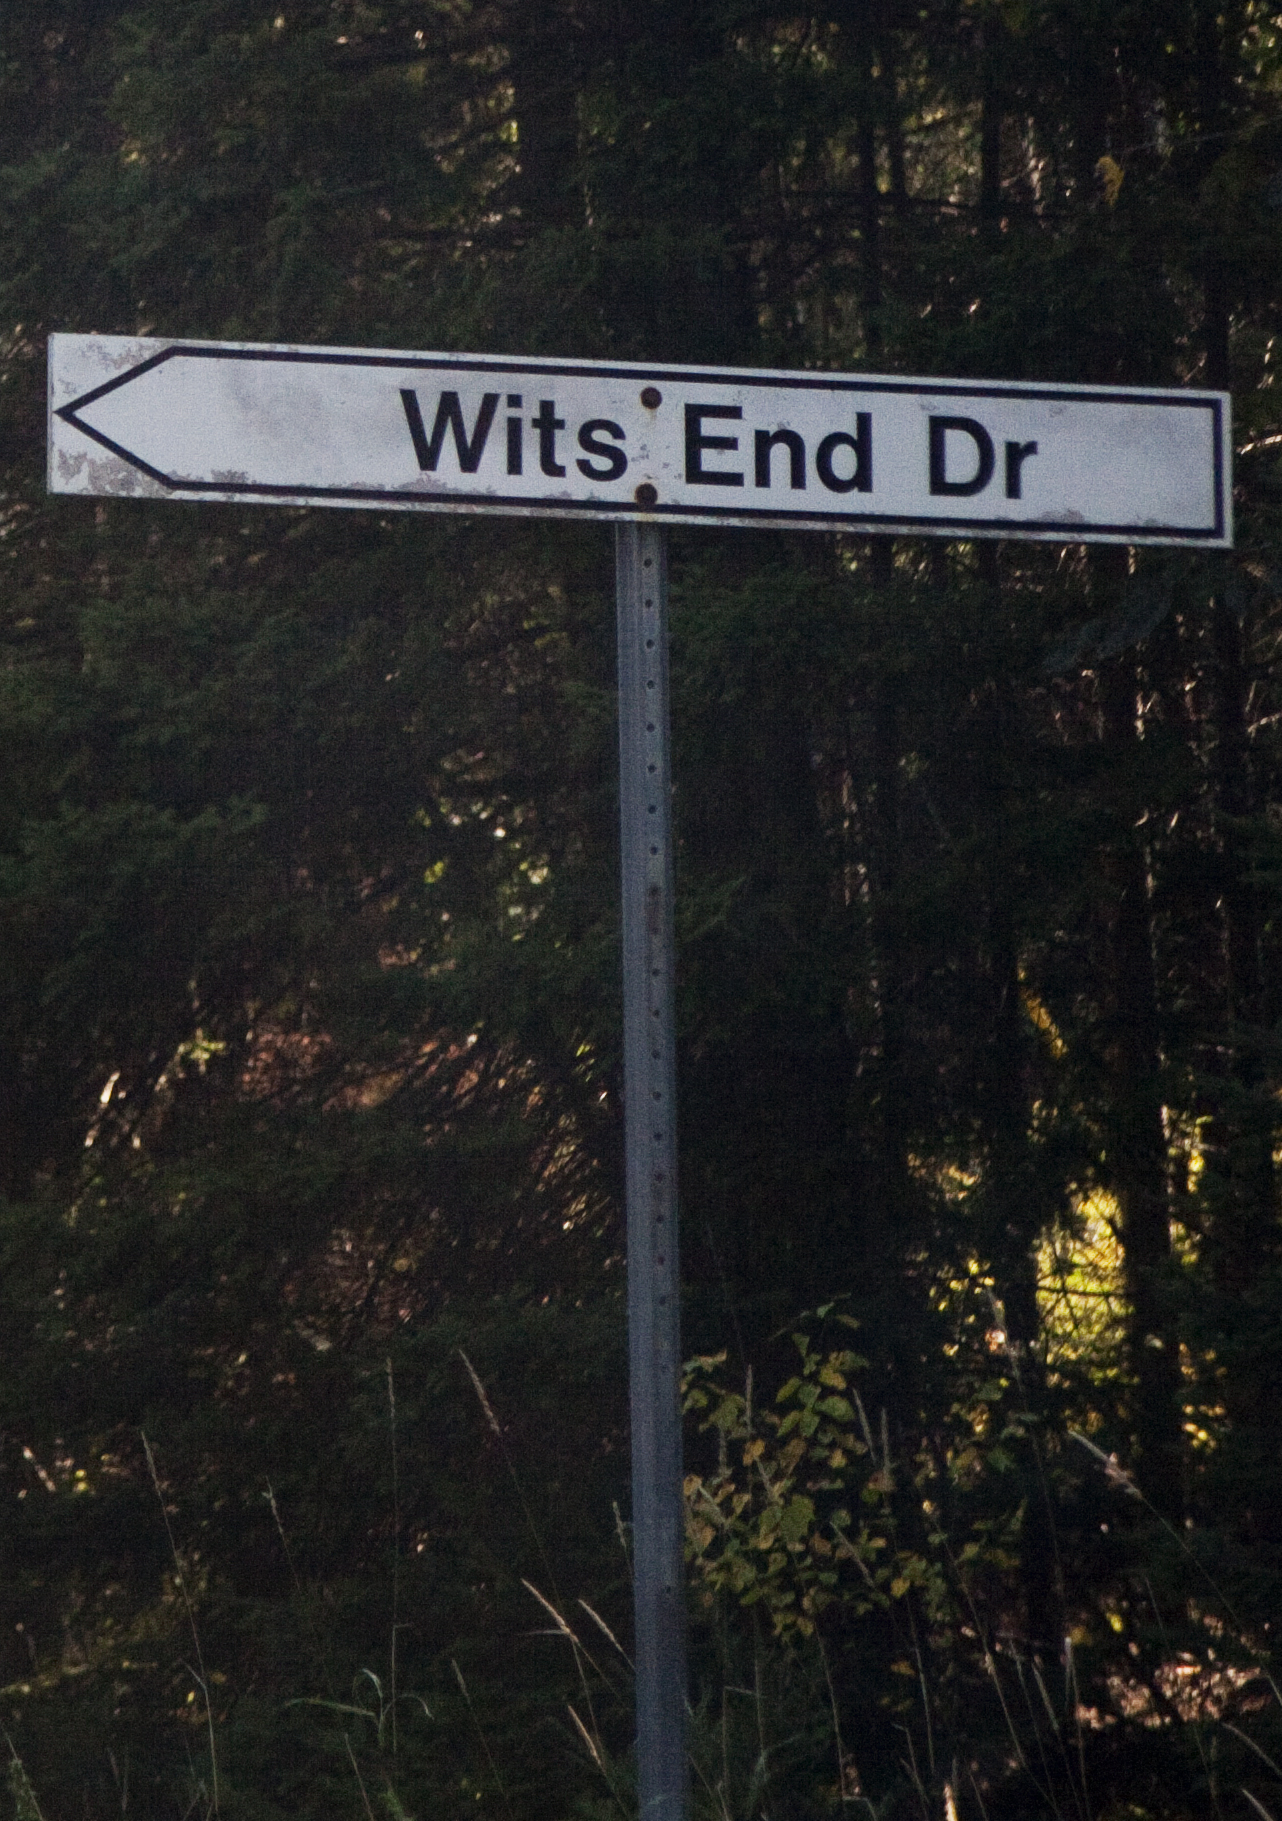 Wits end drive